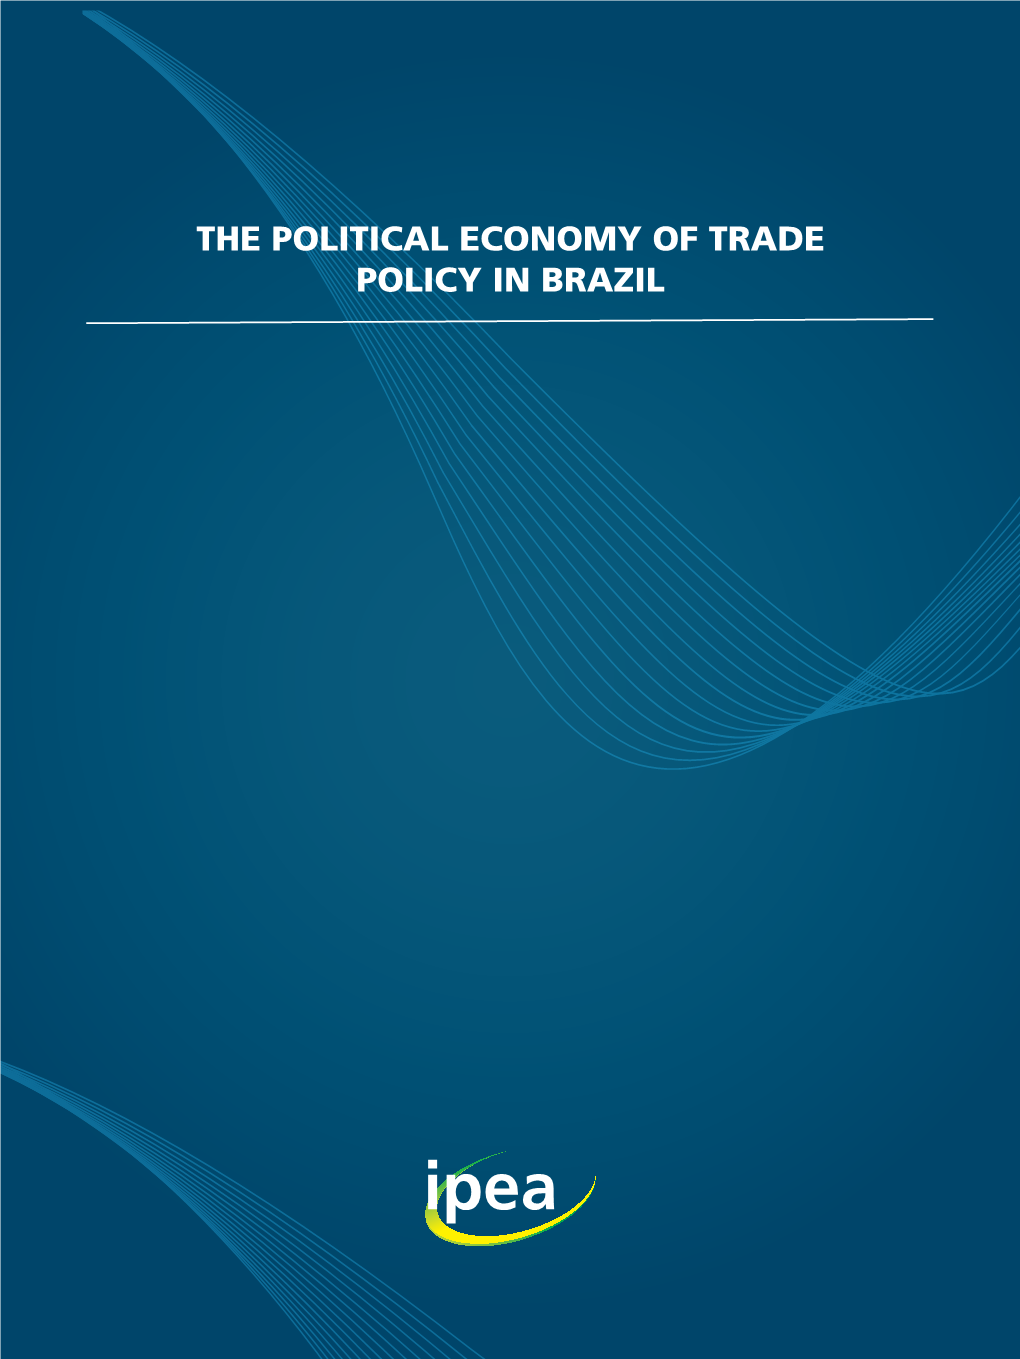 The Political Economy of Trade Policy in Brazil